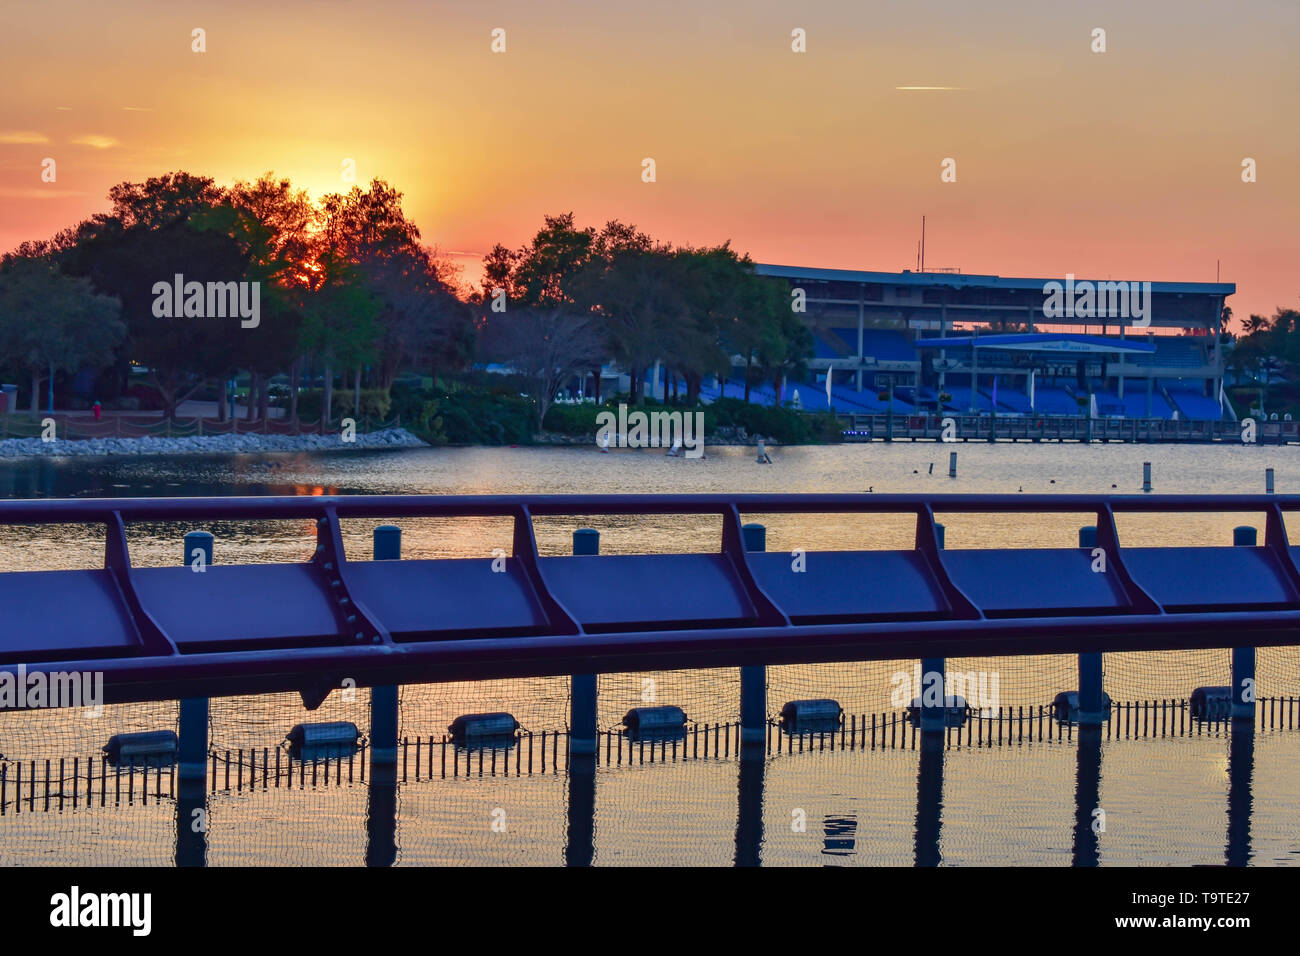 Orlando, Florida. March 09 2019. Partial view of Bayside Stadium and Bridge on colorful sunset at Seaworld in International Drive area  (2) Stock Photo